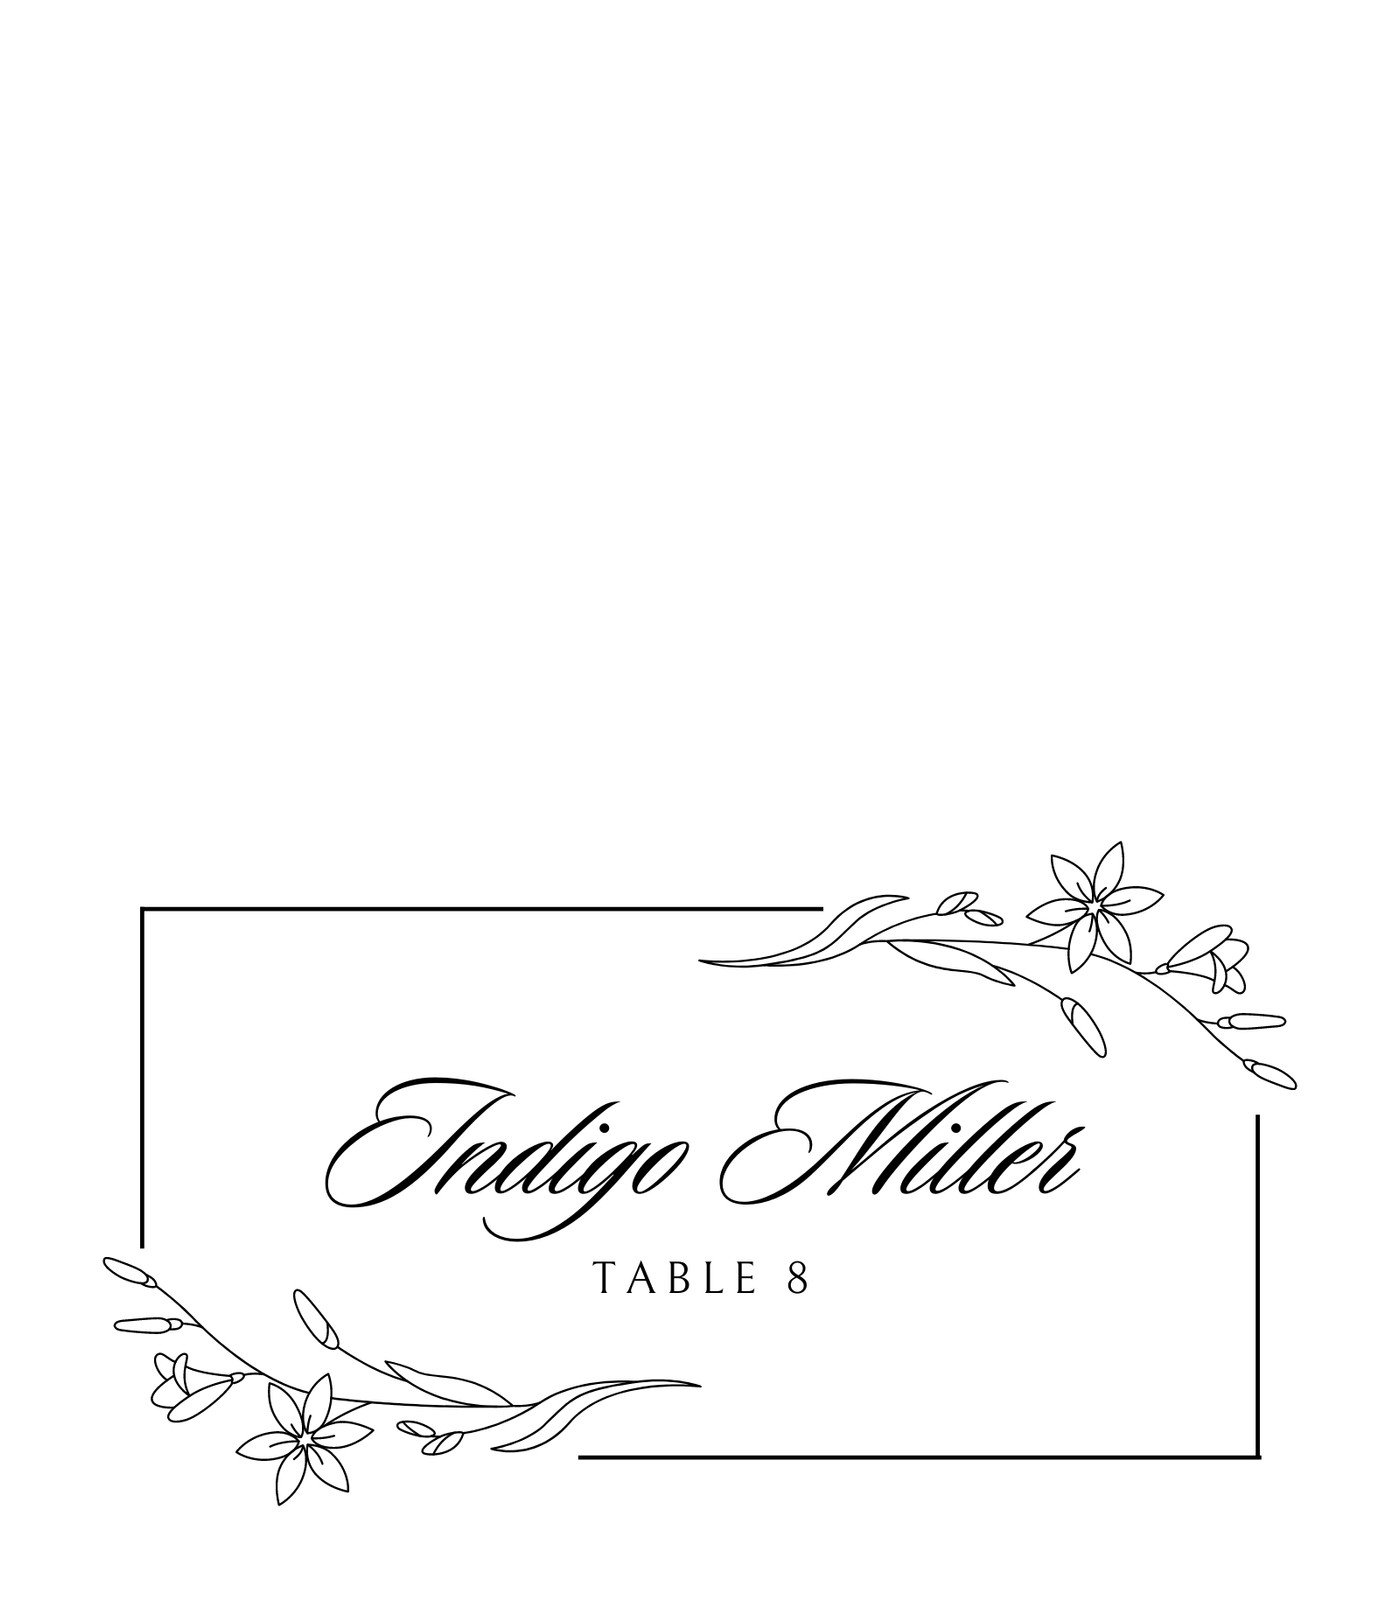 https://marketplace.canva.com/EAFTHU4xdLo/1/0/1400w/canva-black-white-traditional-floral-border-wedding-place-card--FSSX8WD84s.jpg